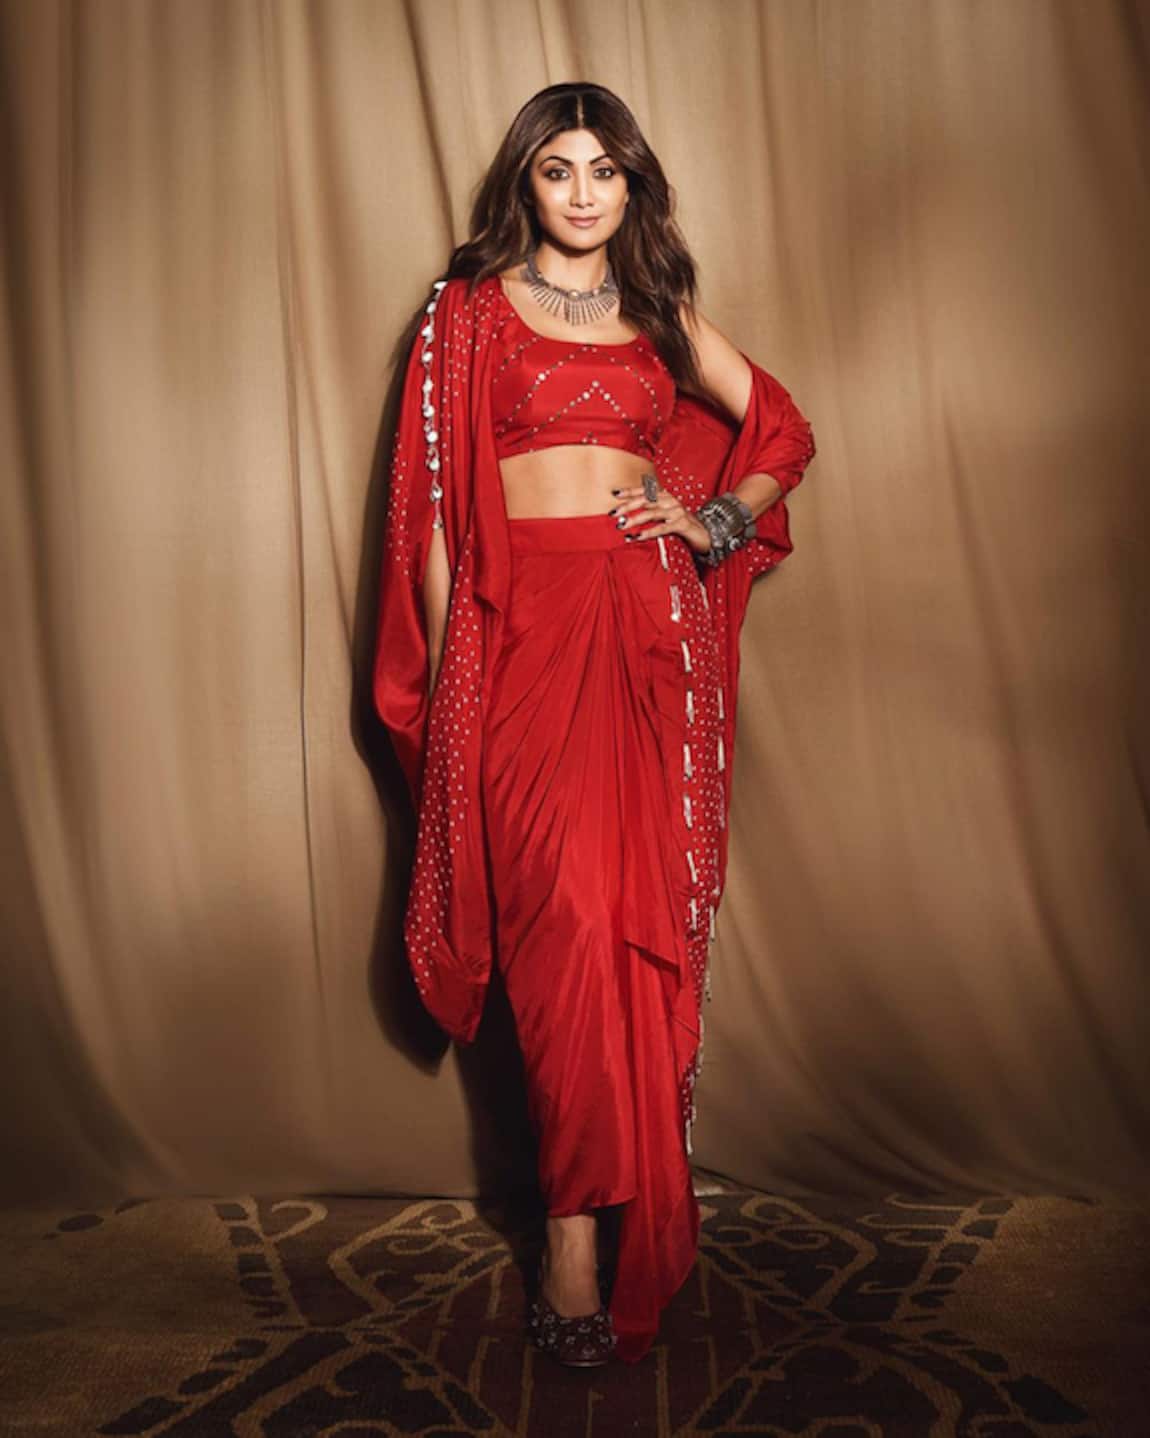 Shilpa Shetty's Contemporary Saree Will Make For A Perfect Cocktail Party  Look